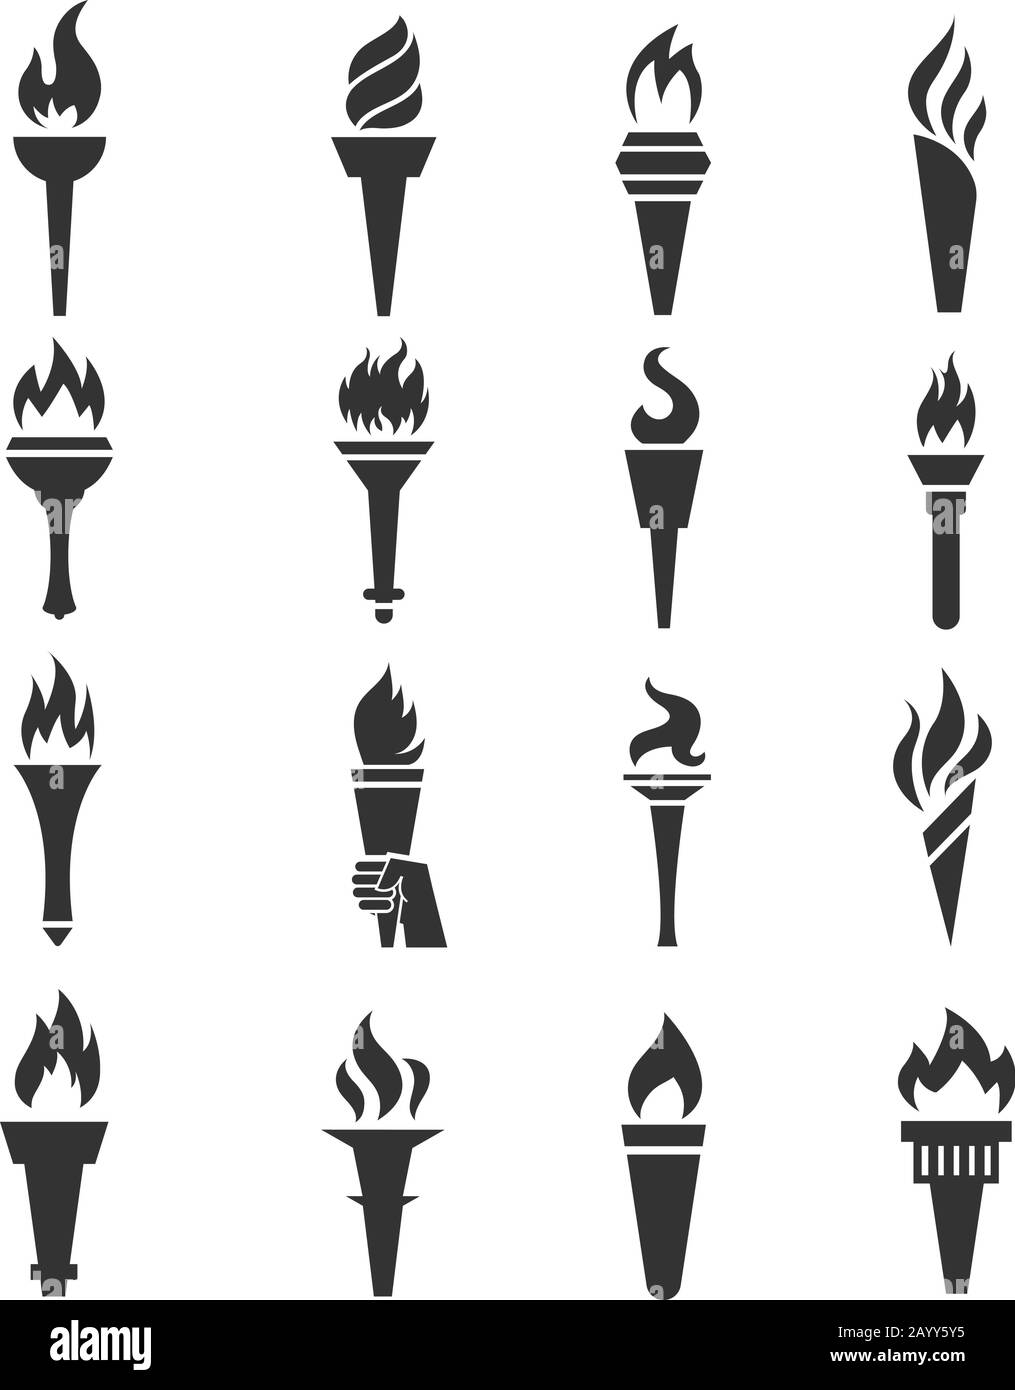 Torch vector icons set. Freedom symbols Stock Vector